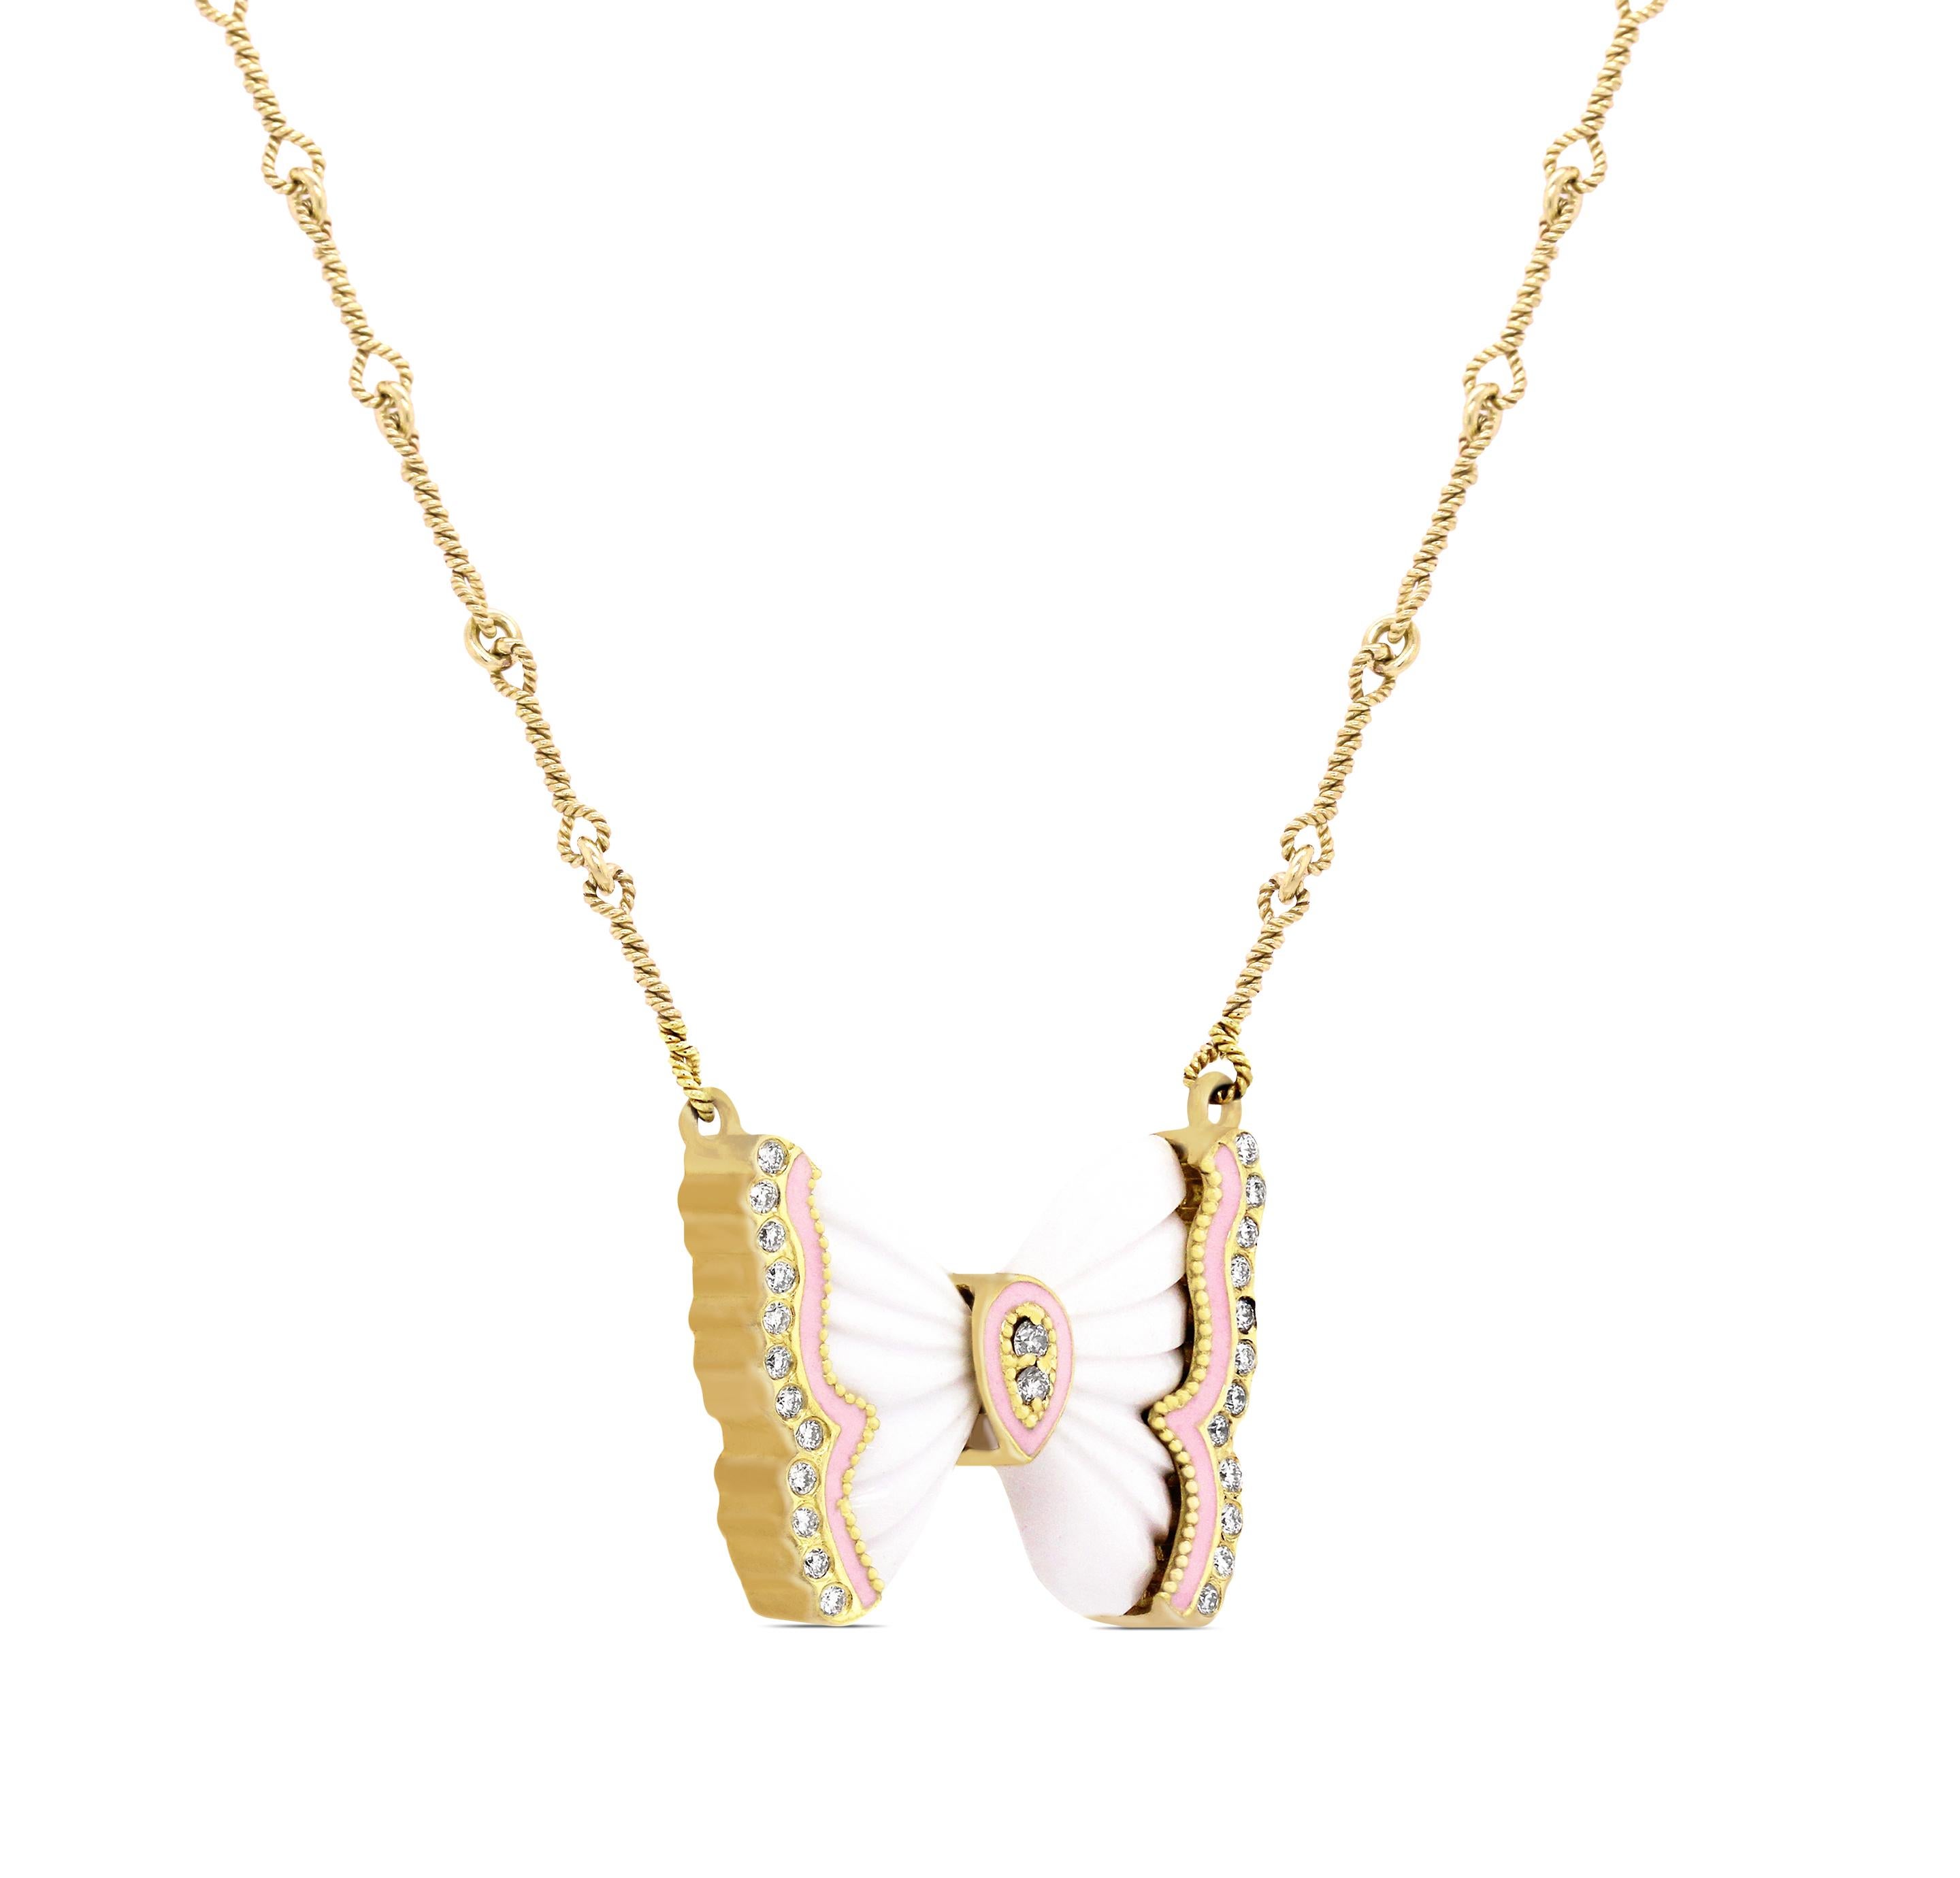 18K Yellow Gold and Diamond Butterfly Pendant Necklace with White Agate and Pink Enamel by Stambolian

This butterfly is from the 2020 Spring Stambolian collection and features two special cut White Agates framed with pink enamel and